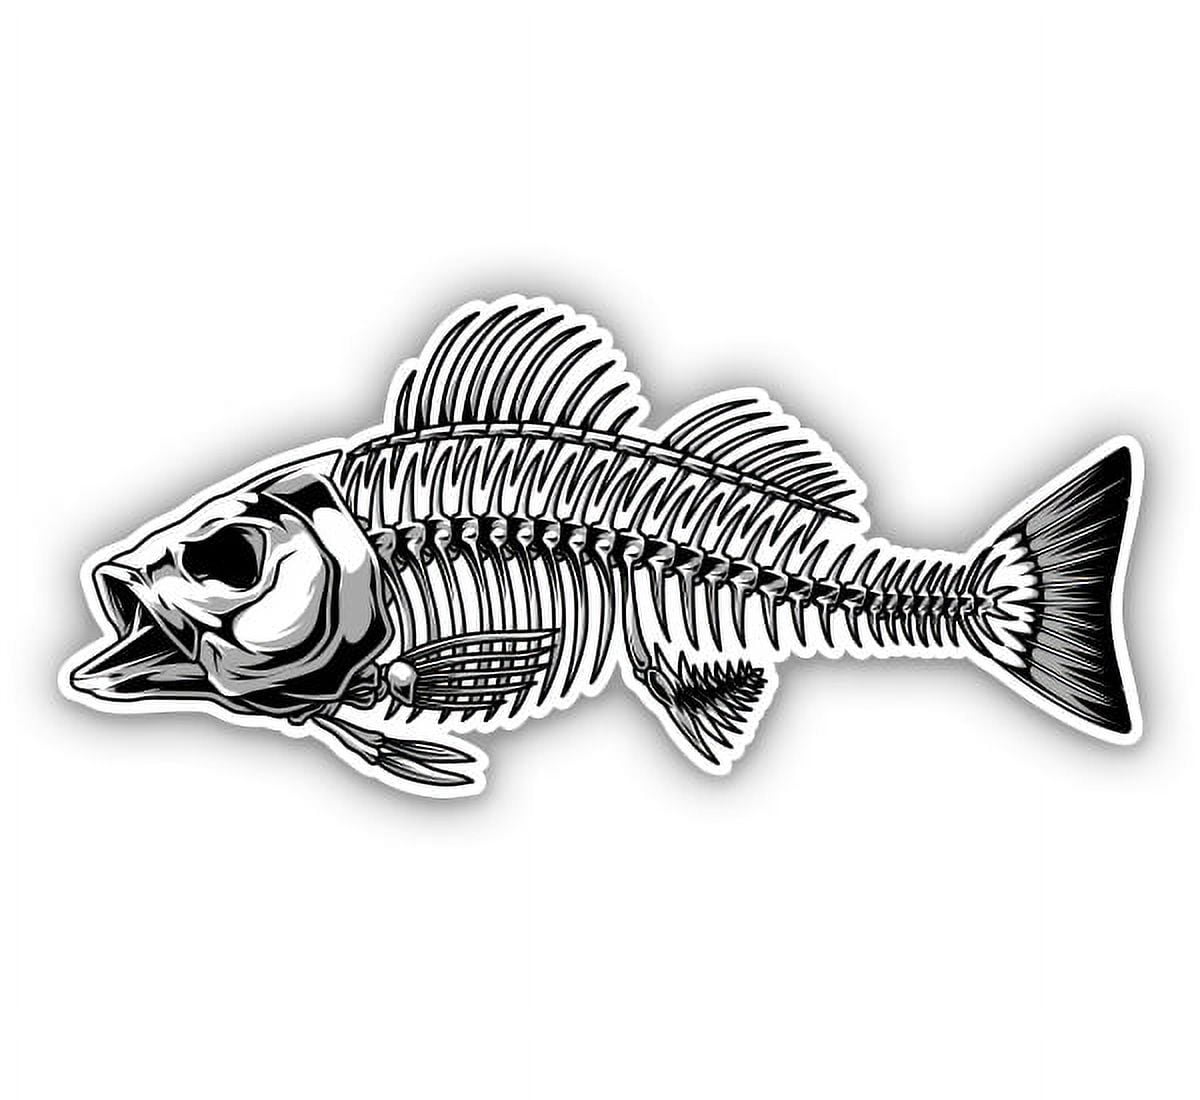 50pcs Fishing Stickers For Laptop And Computer, Outdoor Fishing